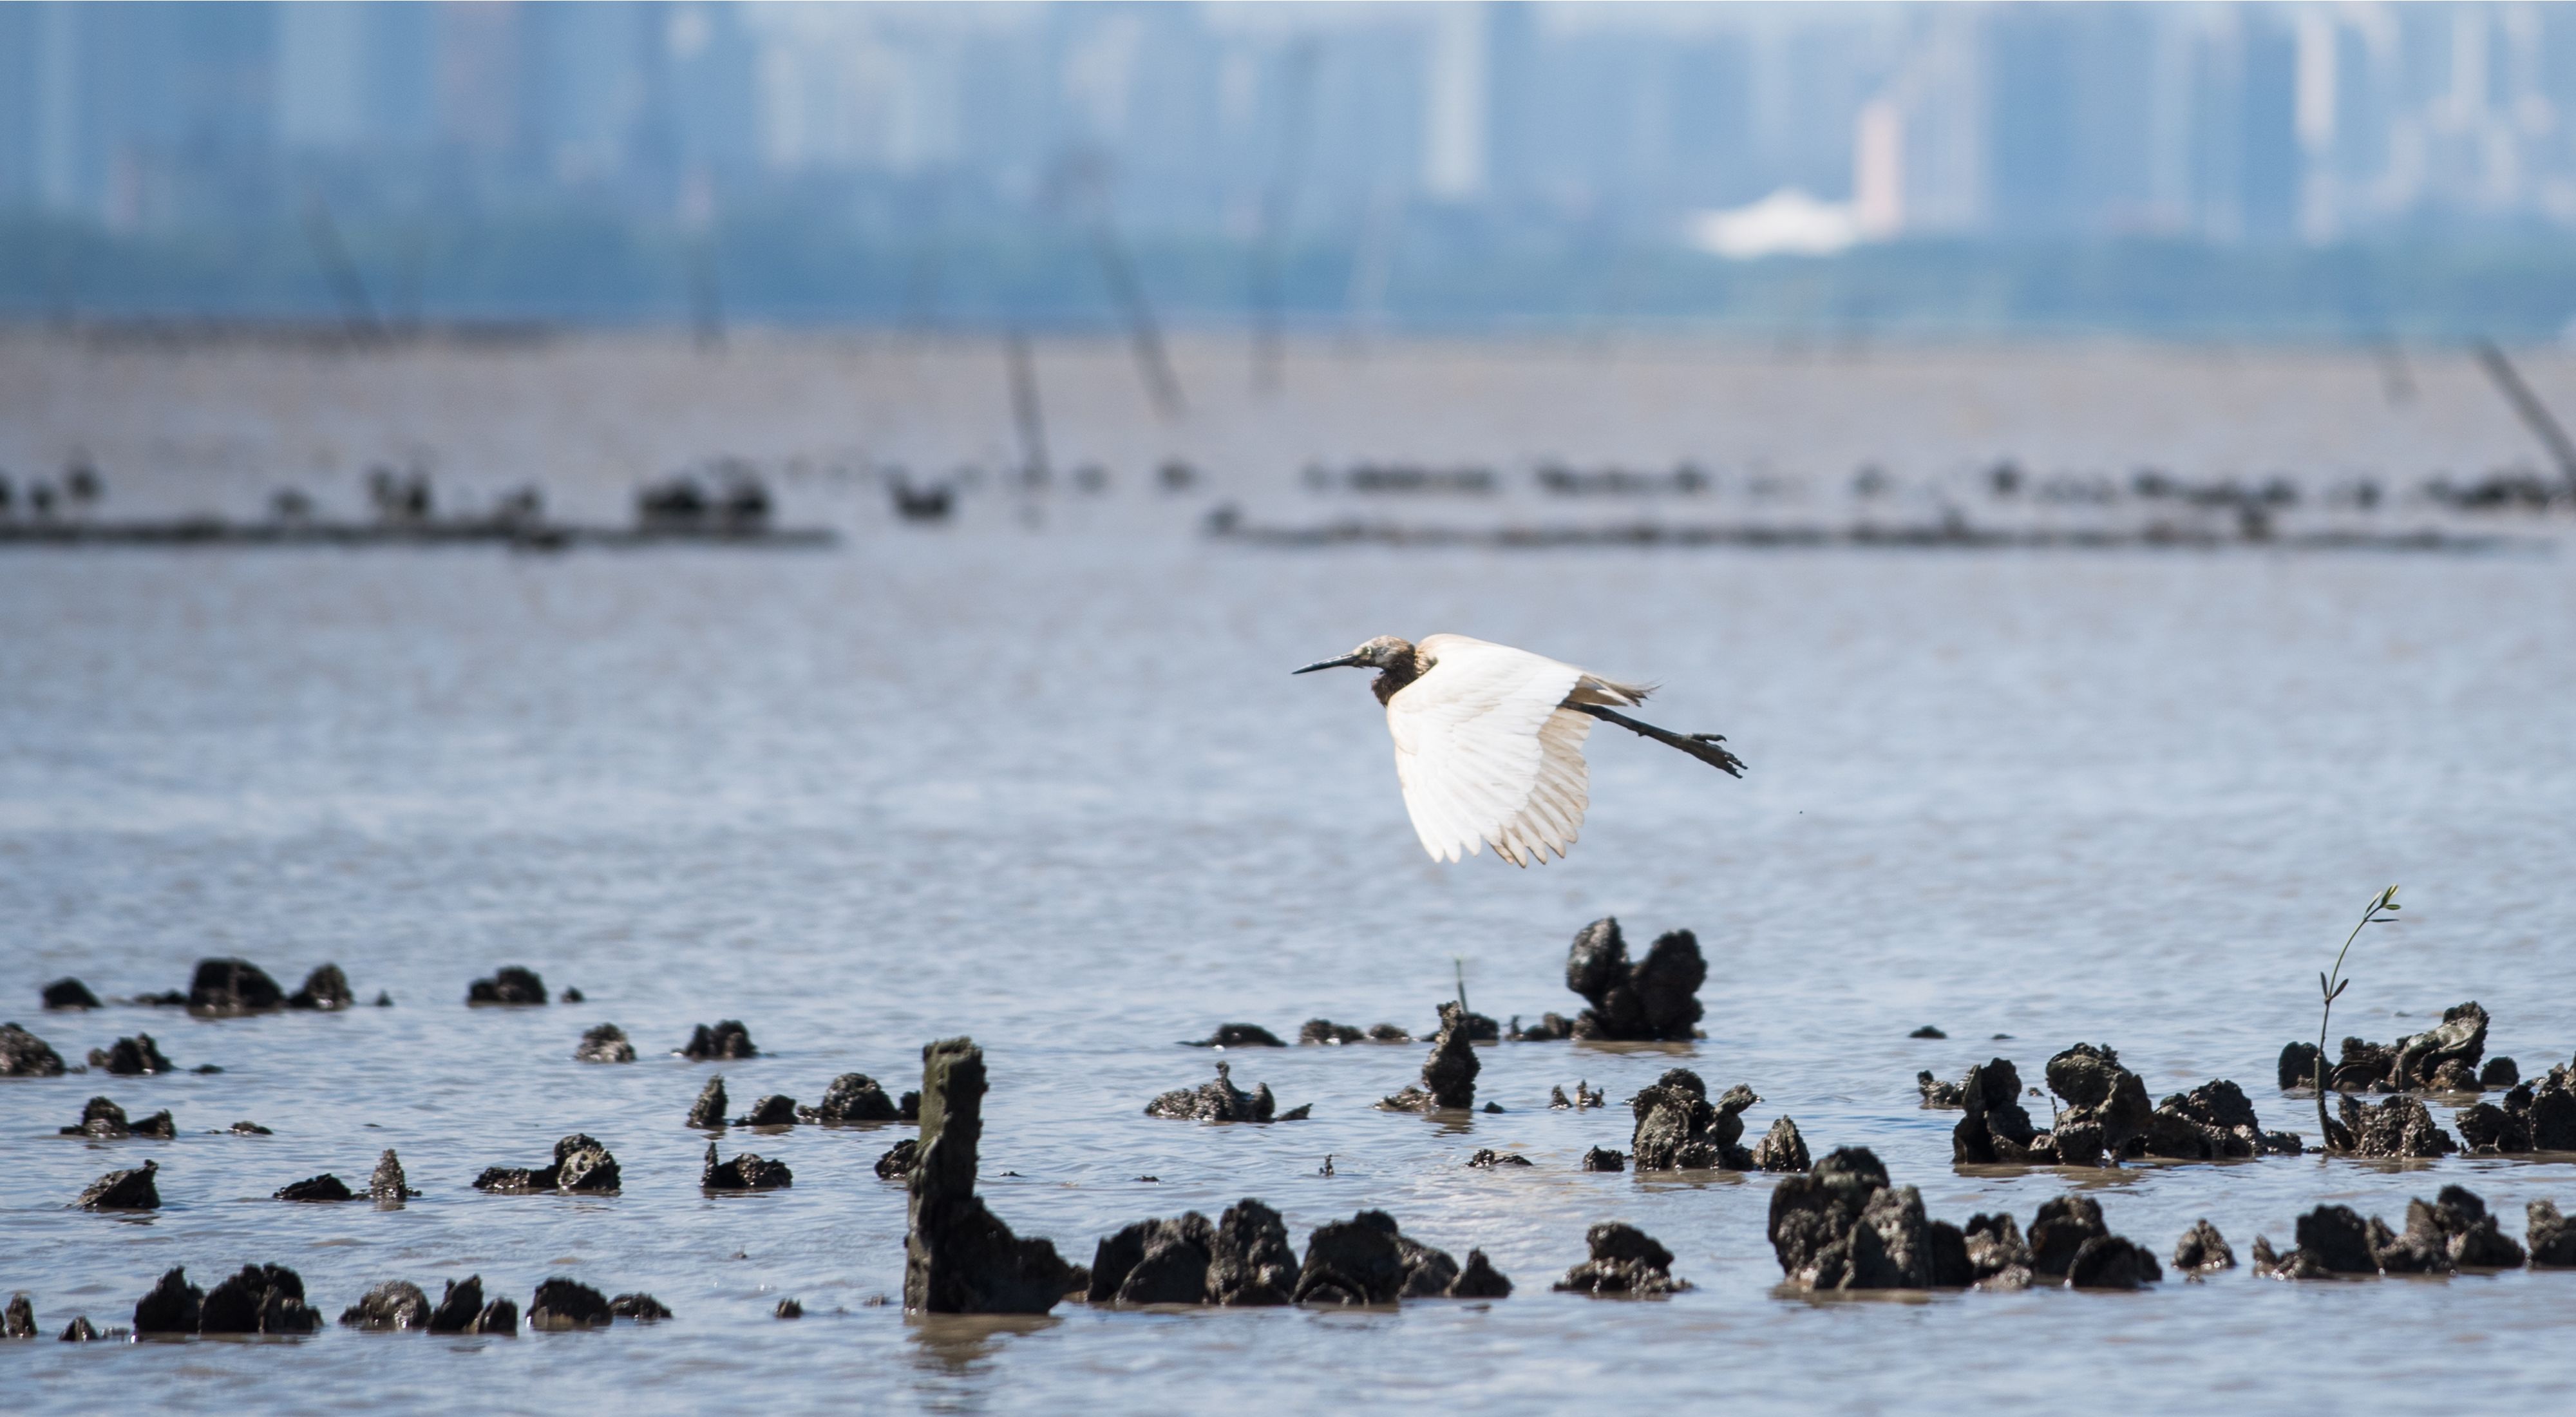 A white waterbird flies over a body of water with oyster shells poking out.